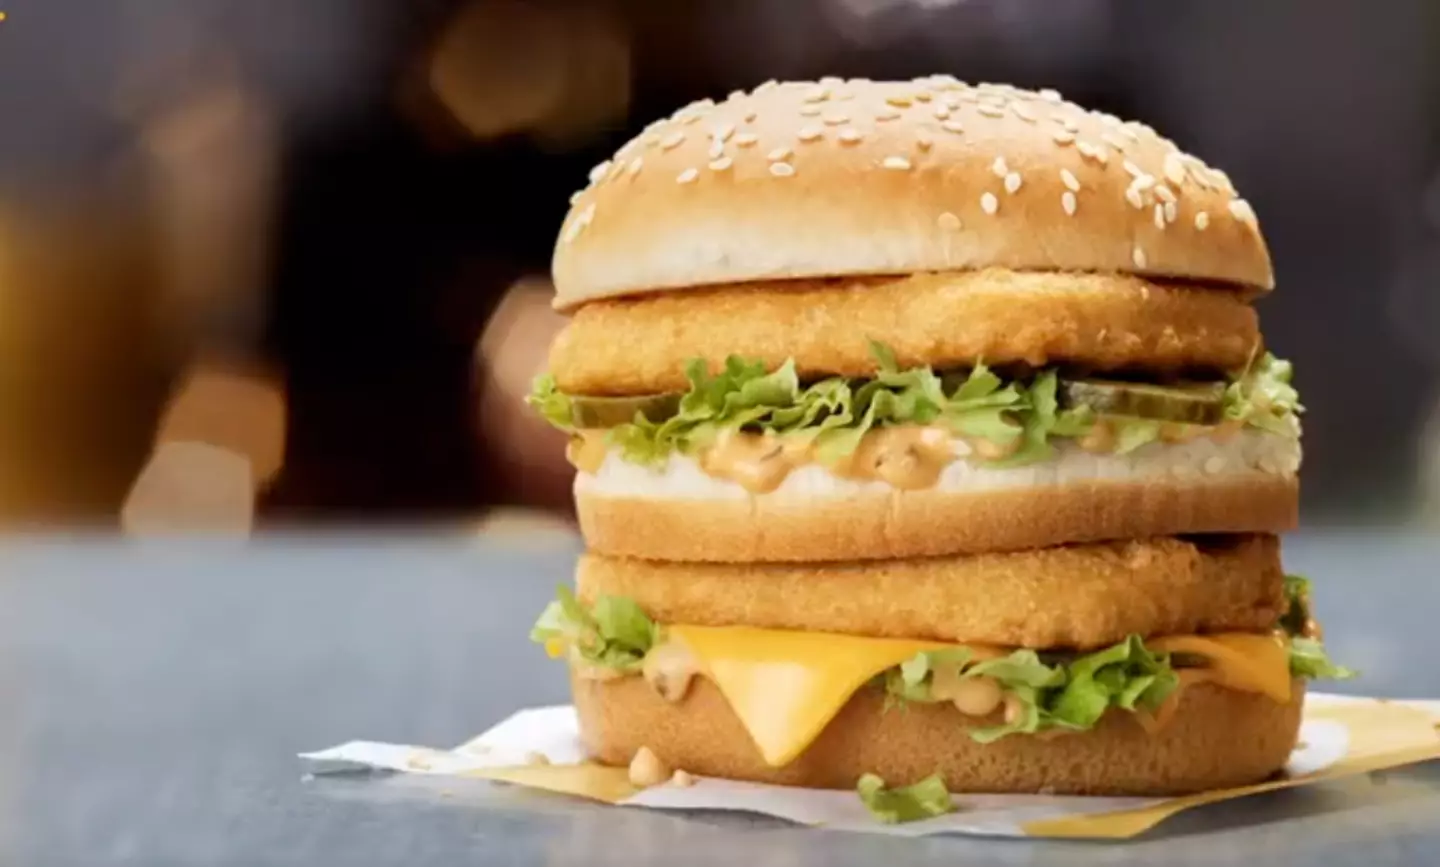 It features a triple layered bun and two 100 percent chicken breast patties.